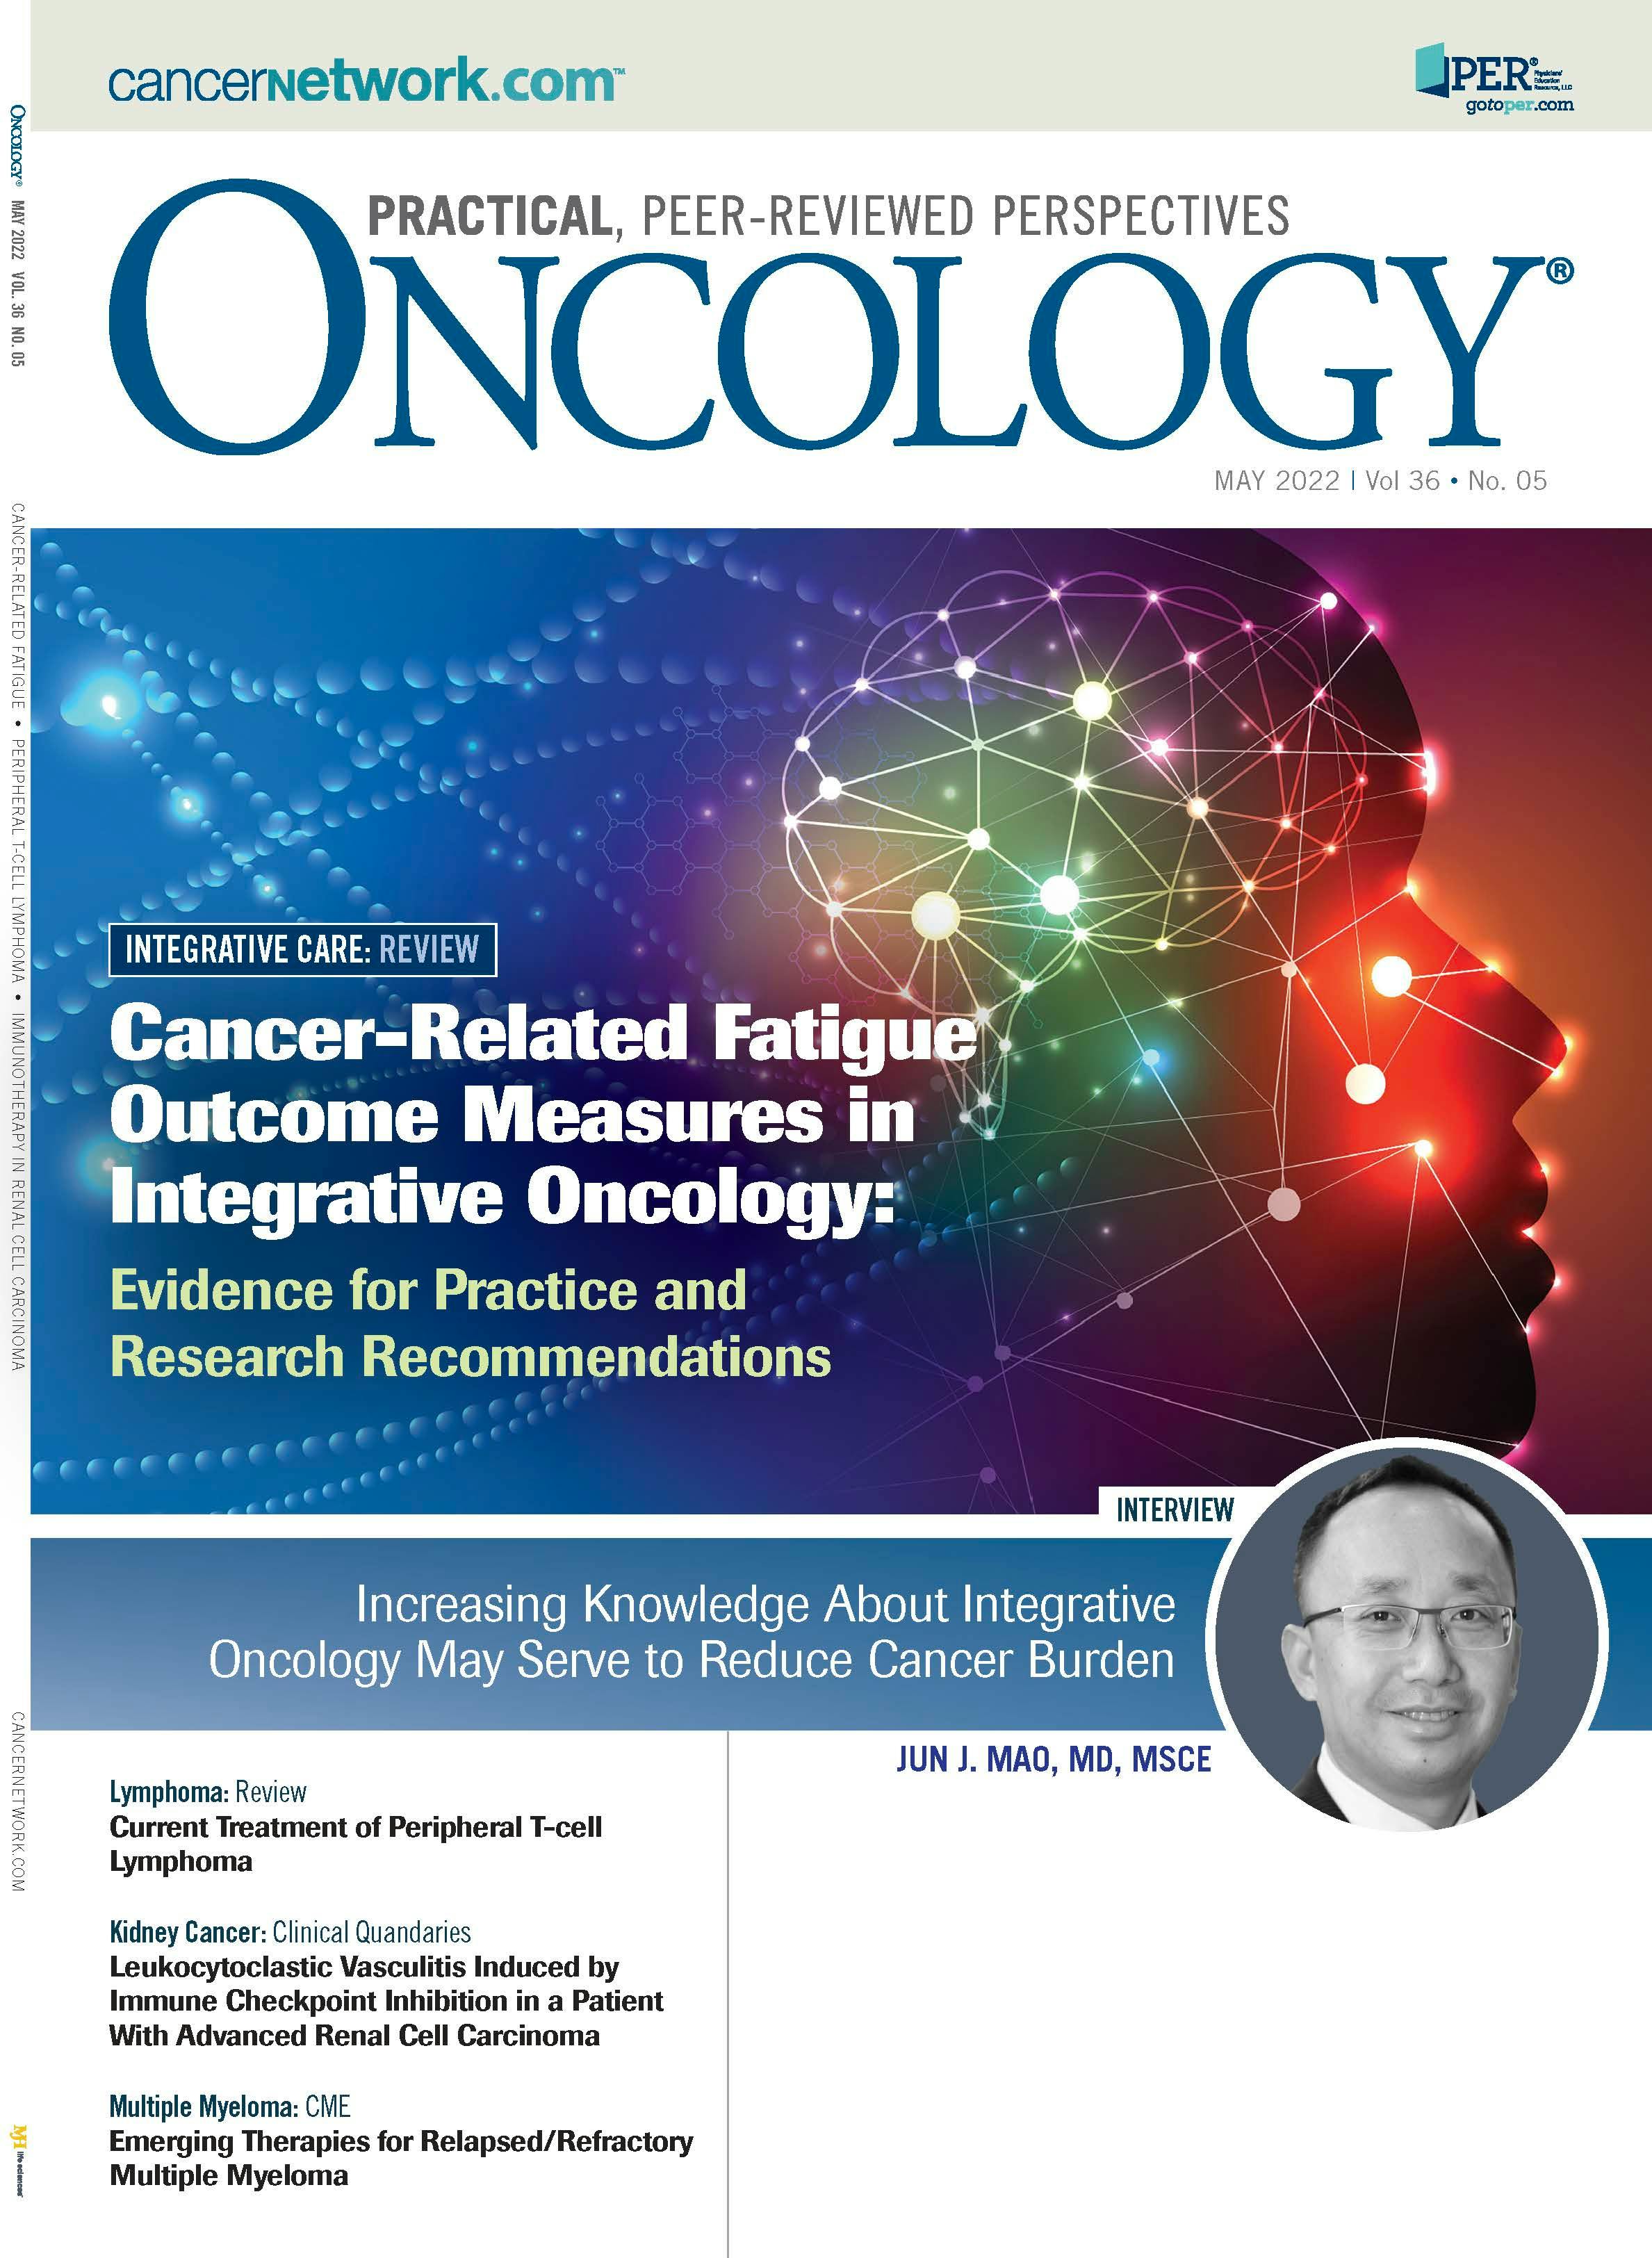 ONCOLOGY Vol 36, Issue 5